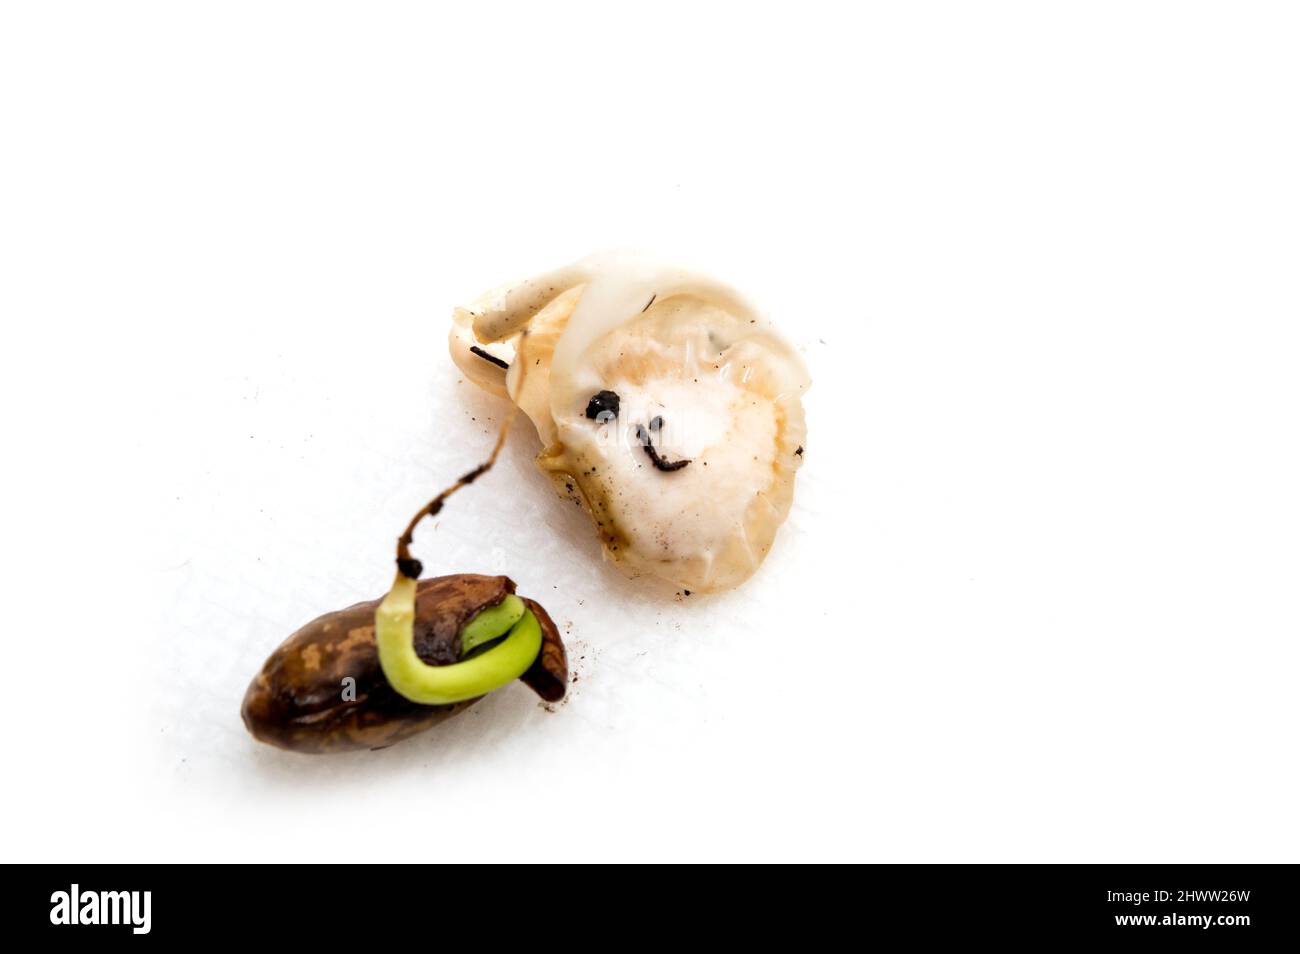 Horizontal shot of lima bean and pinto bean rotted sprouts. Focus is on the lima.  On a white background with copy space. Stock Photo